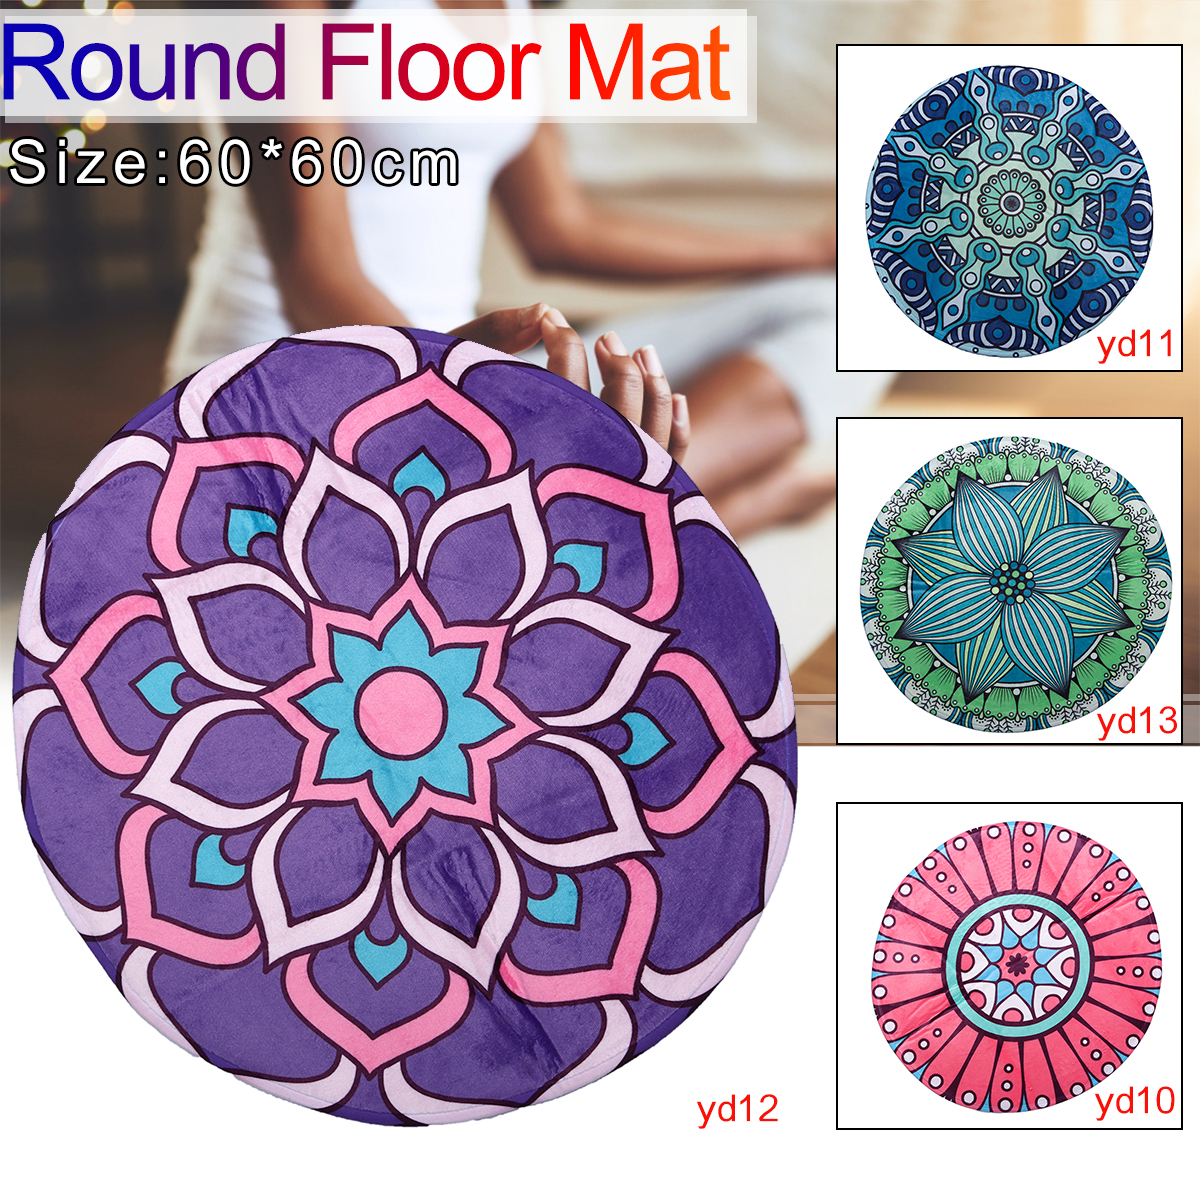 Round-Style-Decoration-Fluffy-Rugs-Shaggy-Carpet-Floor-Mat-Anti-Skid-at-Home-Bedroom-Yoga-Meditaion--1422497-1